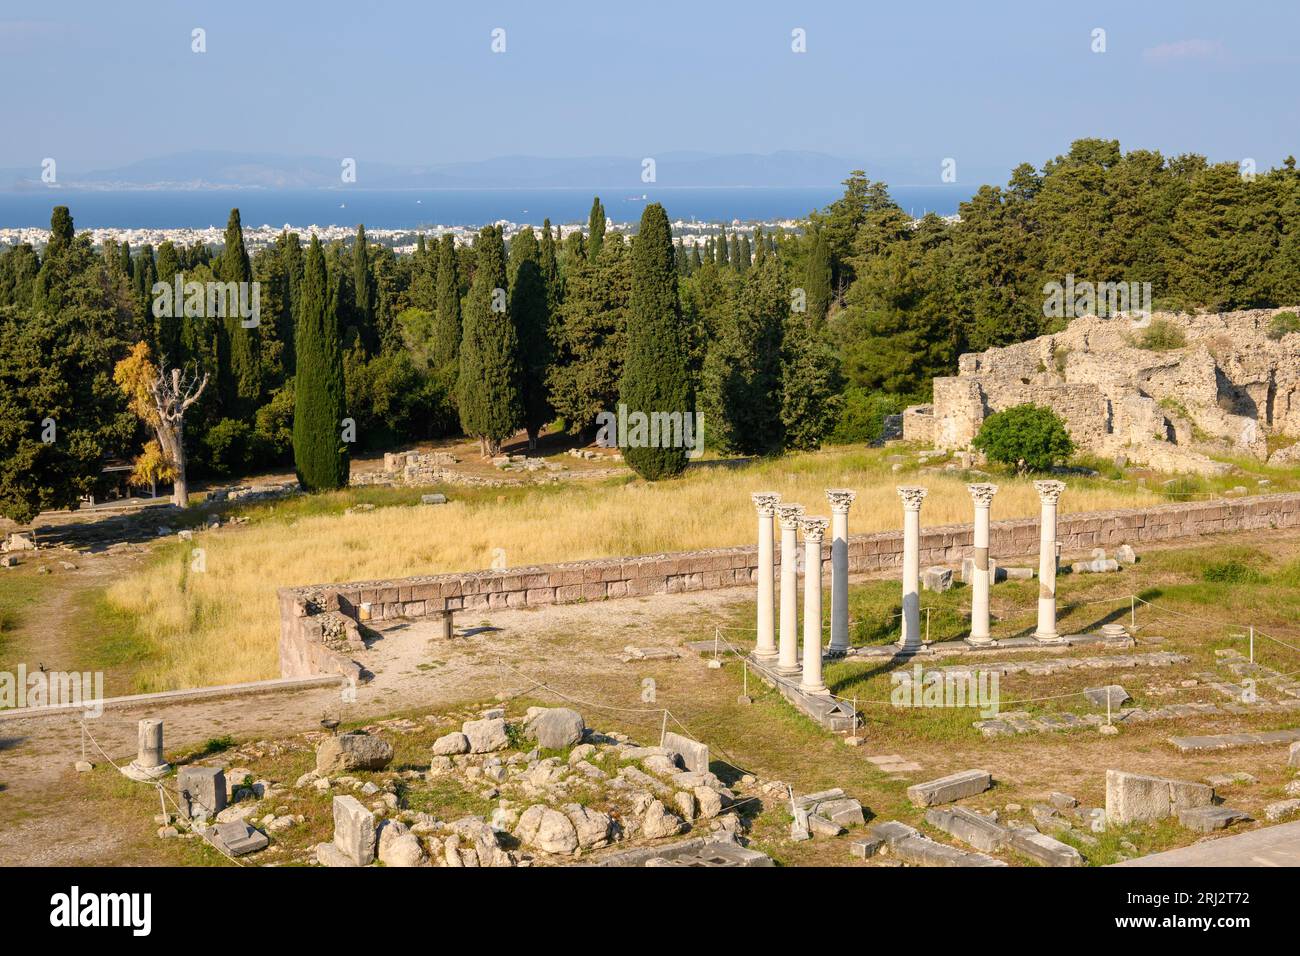 The archaeological site of the Asklepion on the island of Kos in Greece Stock Photo